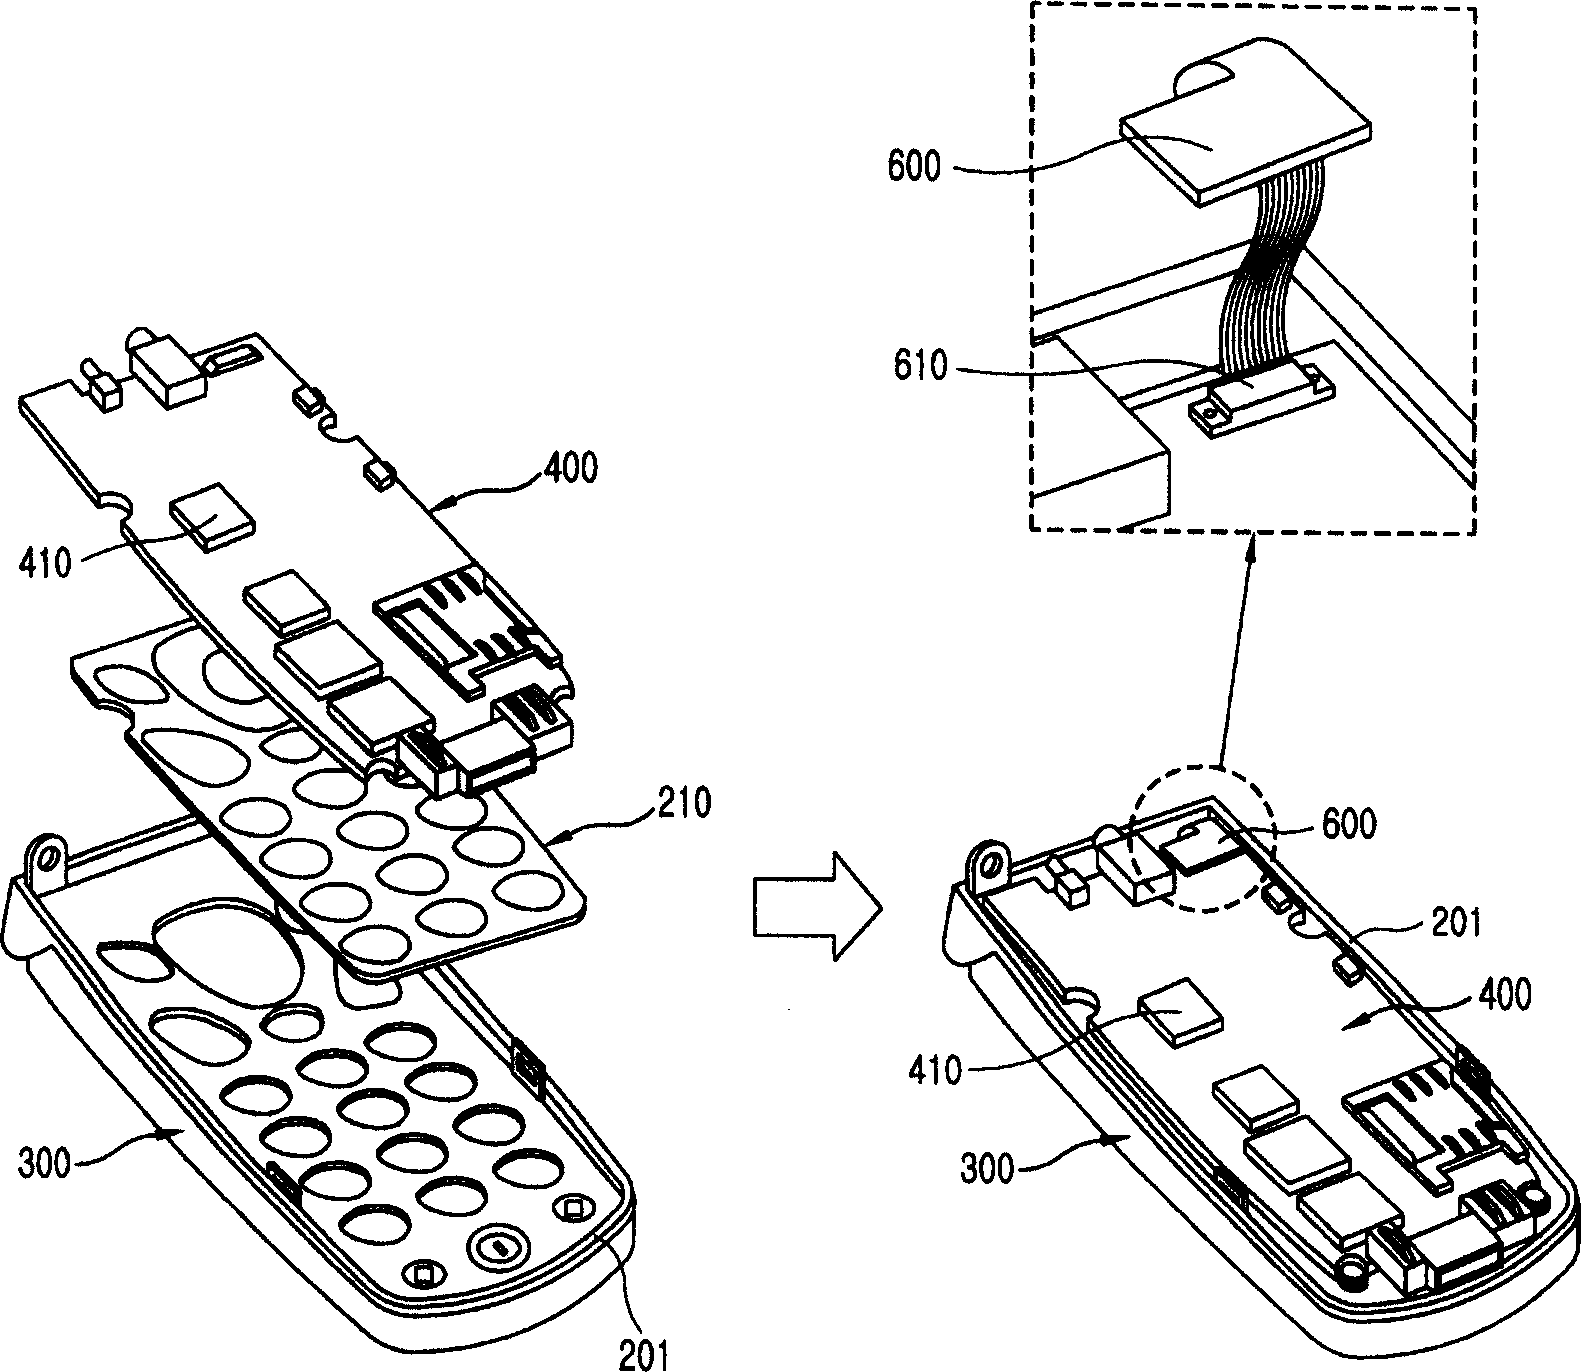 Mobile communication terminal with signal connector